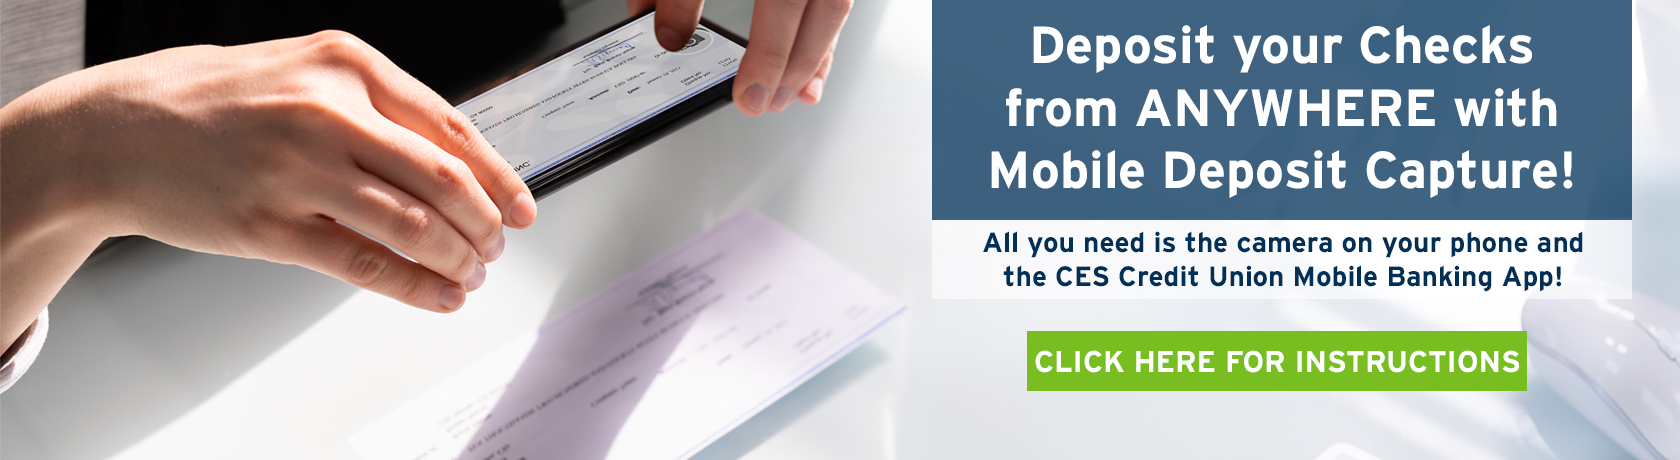 You can now make check deposits from anywhere with Mobile Deposit Capture (MDC)! All you need is the CES Credit Union mobile banking app and you can deposit checks quickly and easily by utilizing the camera on your mobile device!

